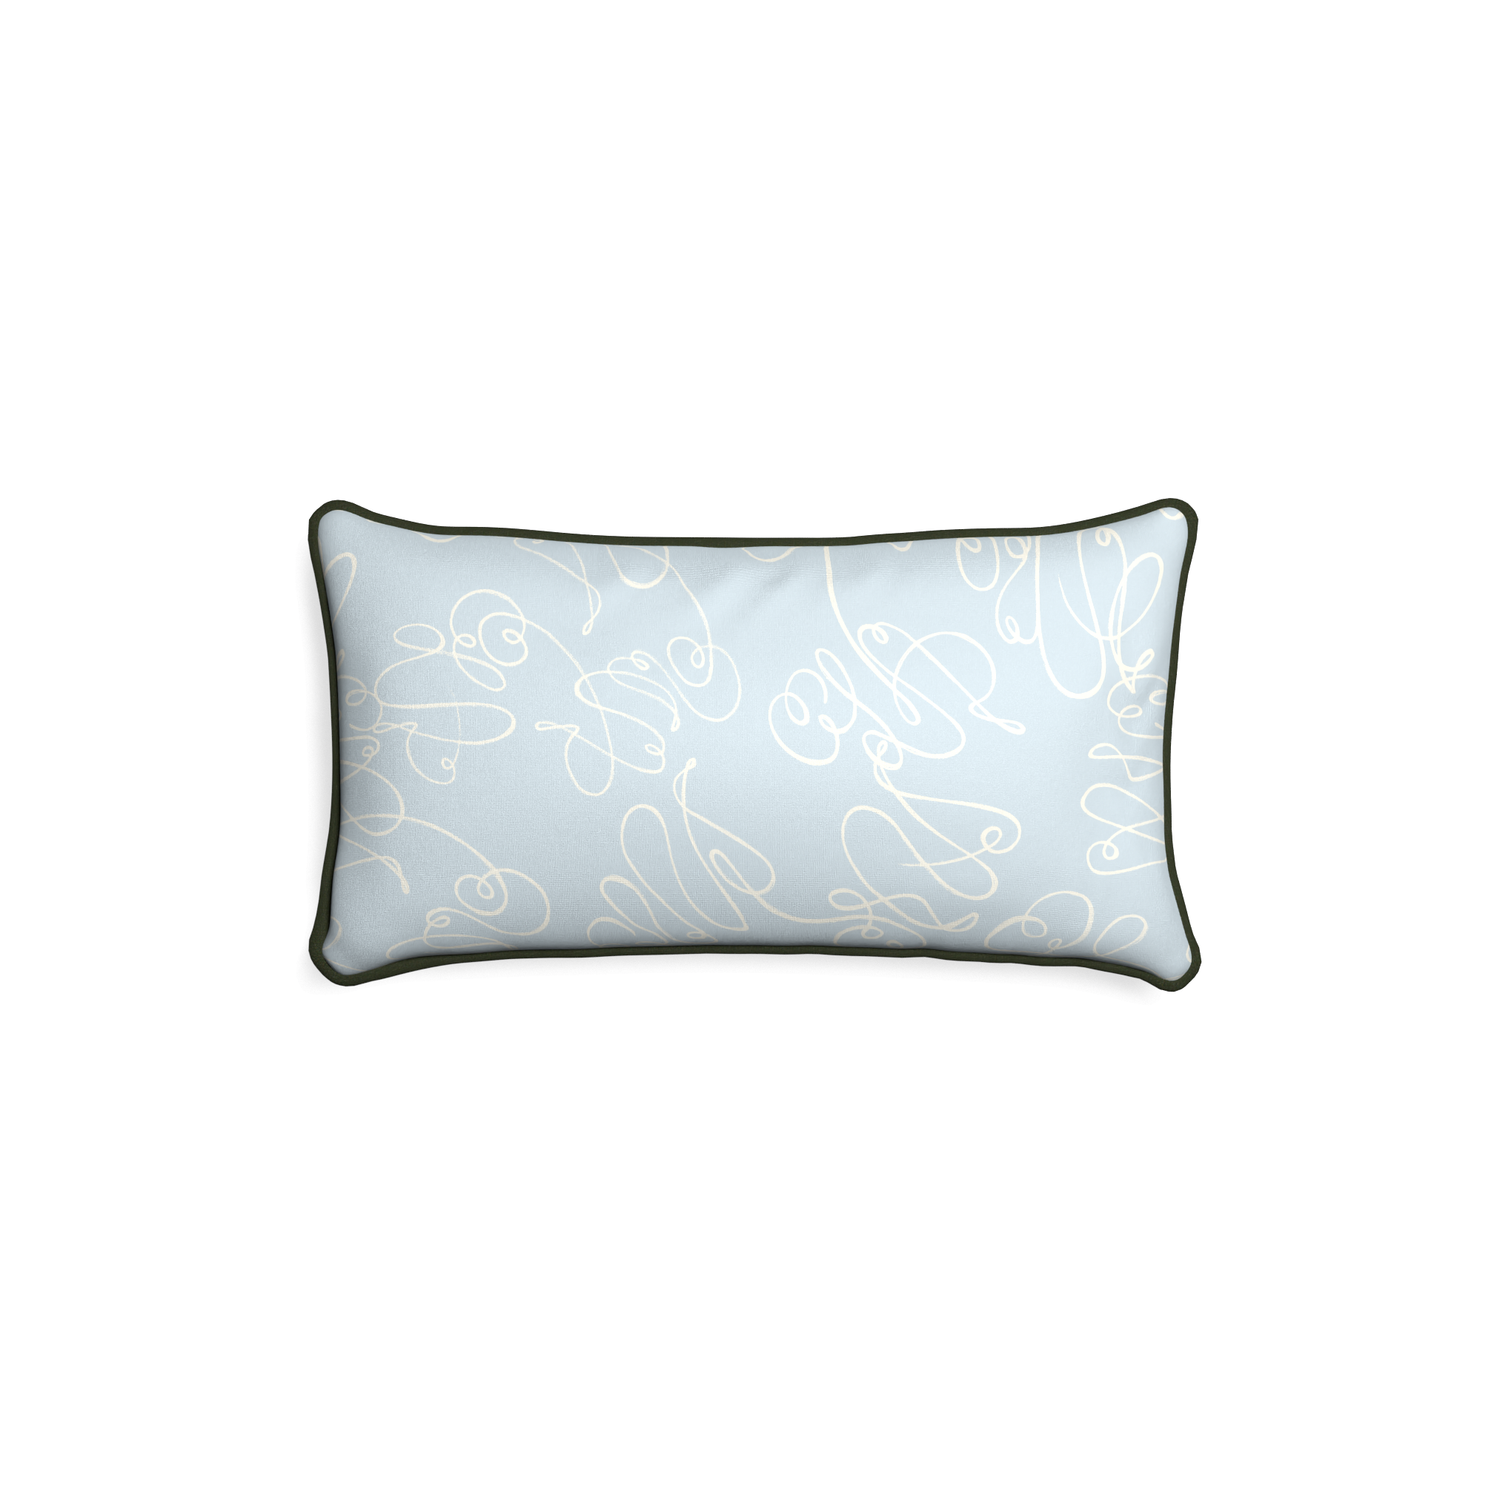 Petite-lumbar mirabella custom powder blue abstractpillow with f piping on white background